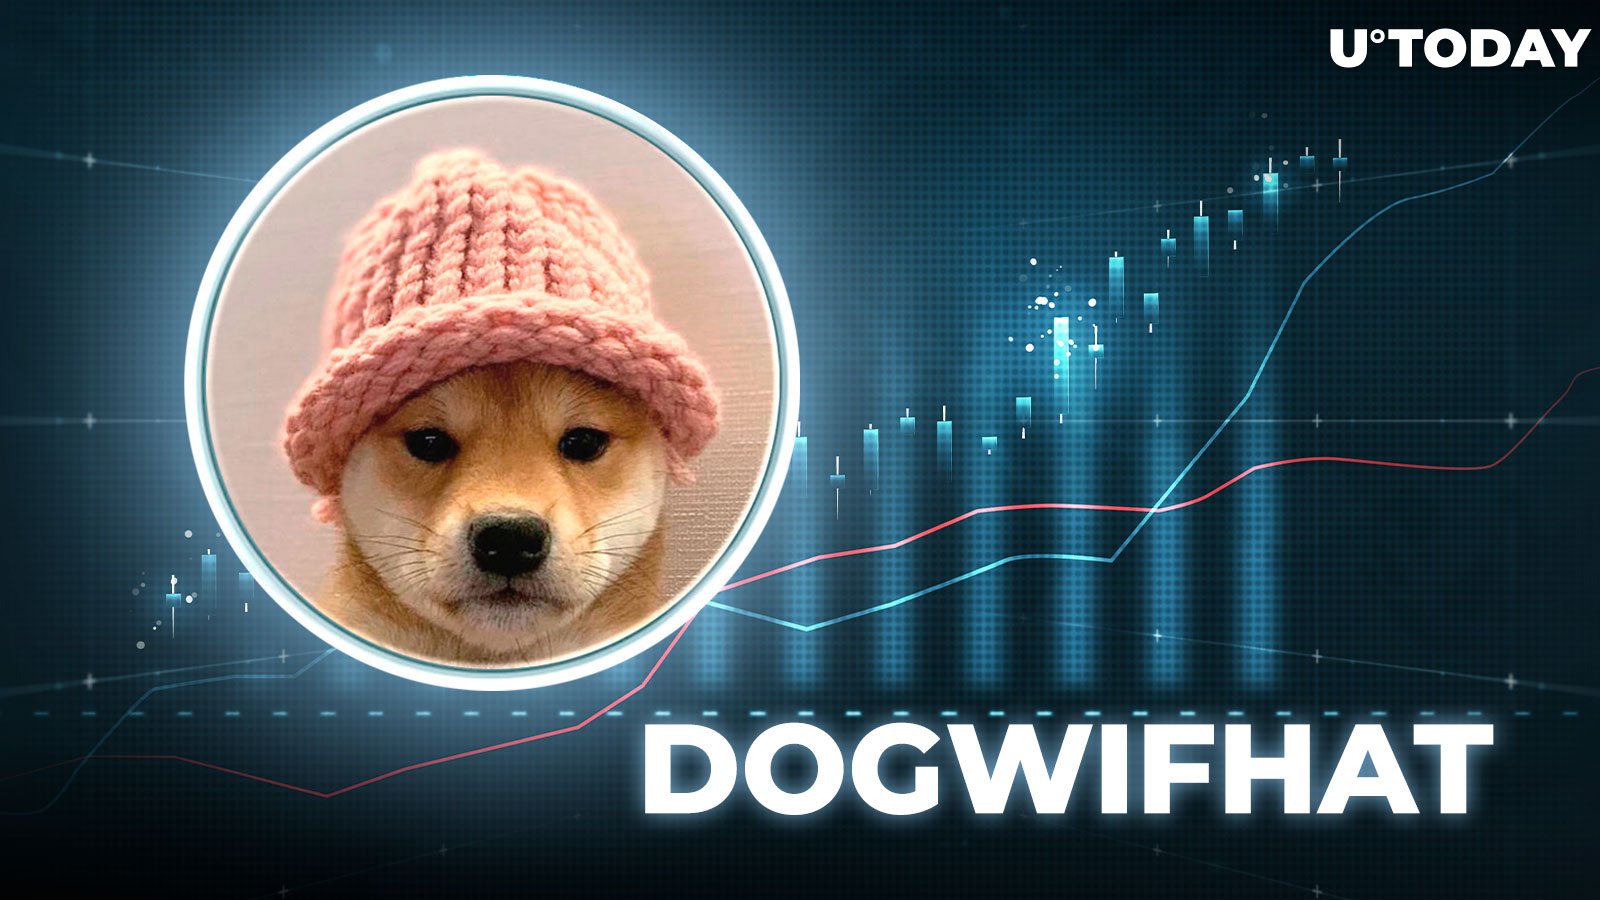 Solana-based Dogwifhat and Dogecoin trim gains as Bitcoin struggles to regain $64,000